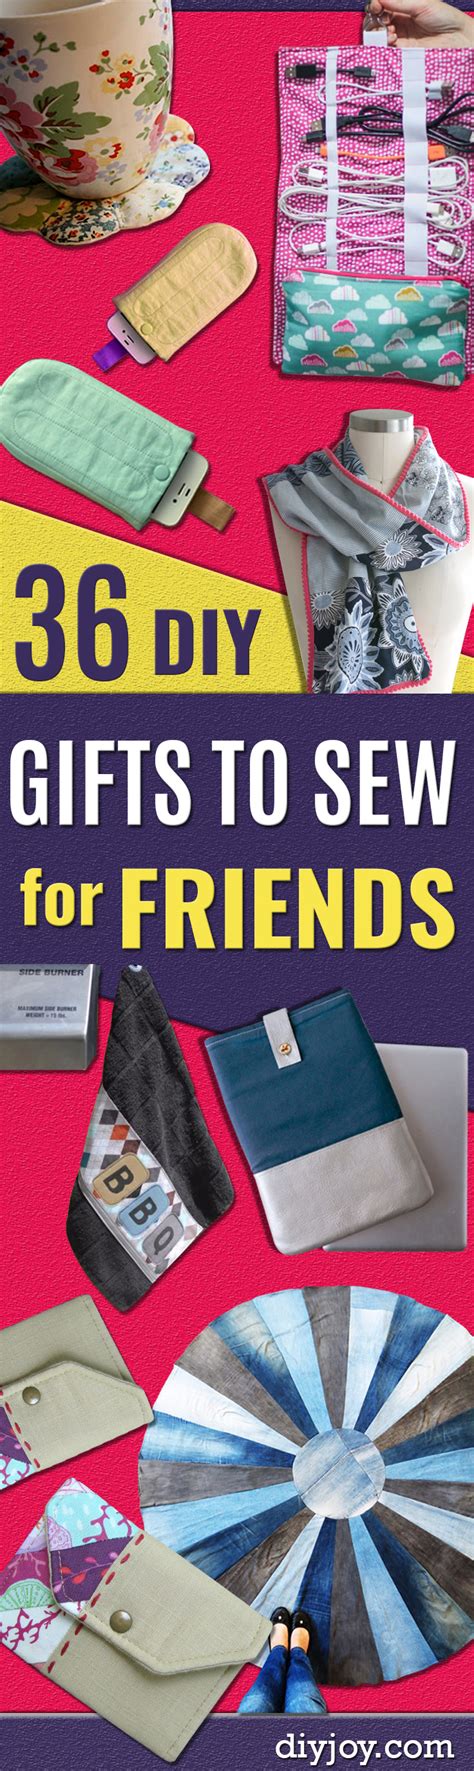 Your best friend deserves funny wine glasses, addictive cookbooks (bet you can guess which one!), and golden girls prayer candles. 36 Creative DIY Gifts to Sew for Friends